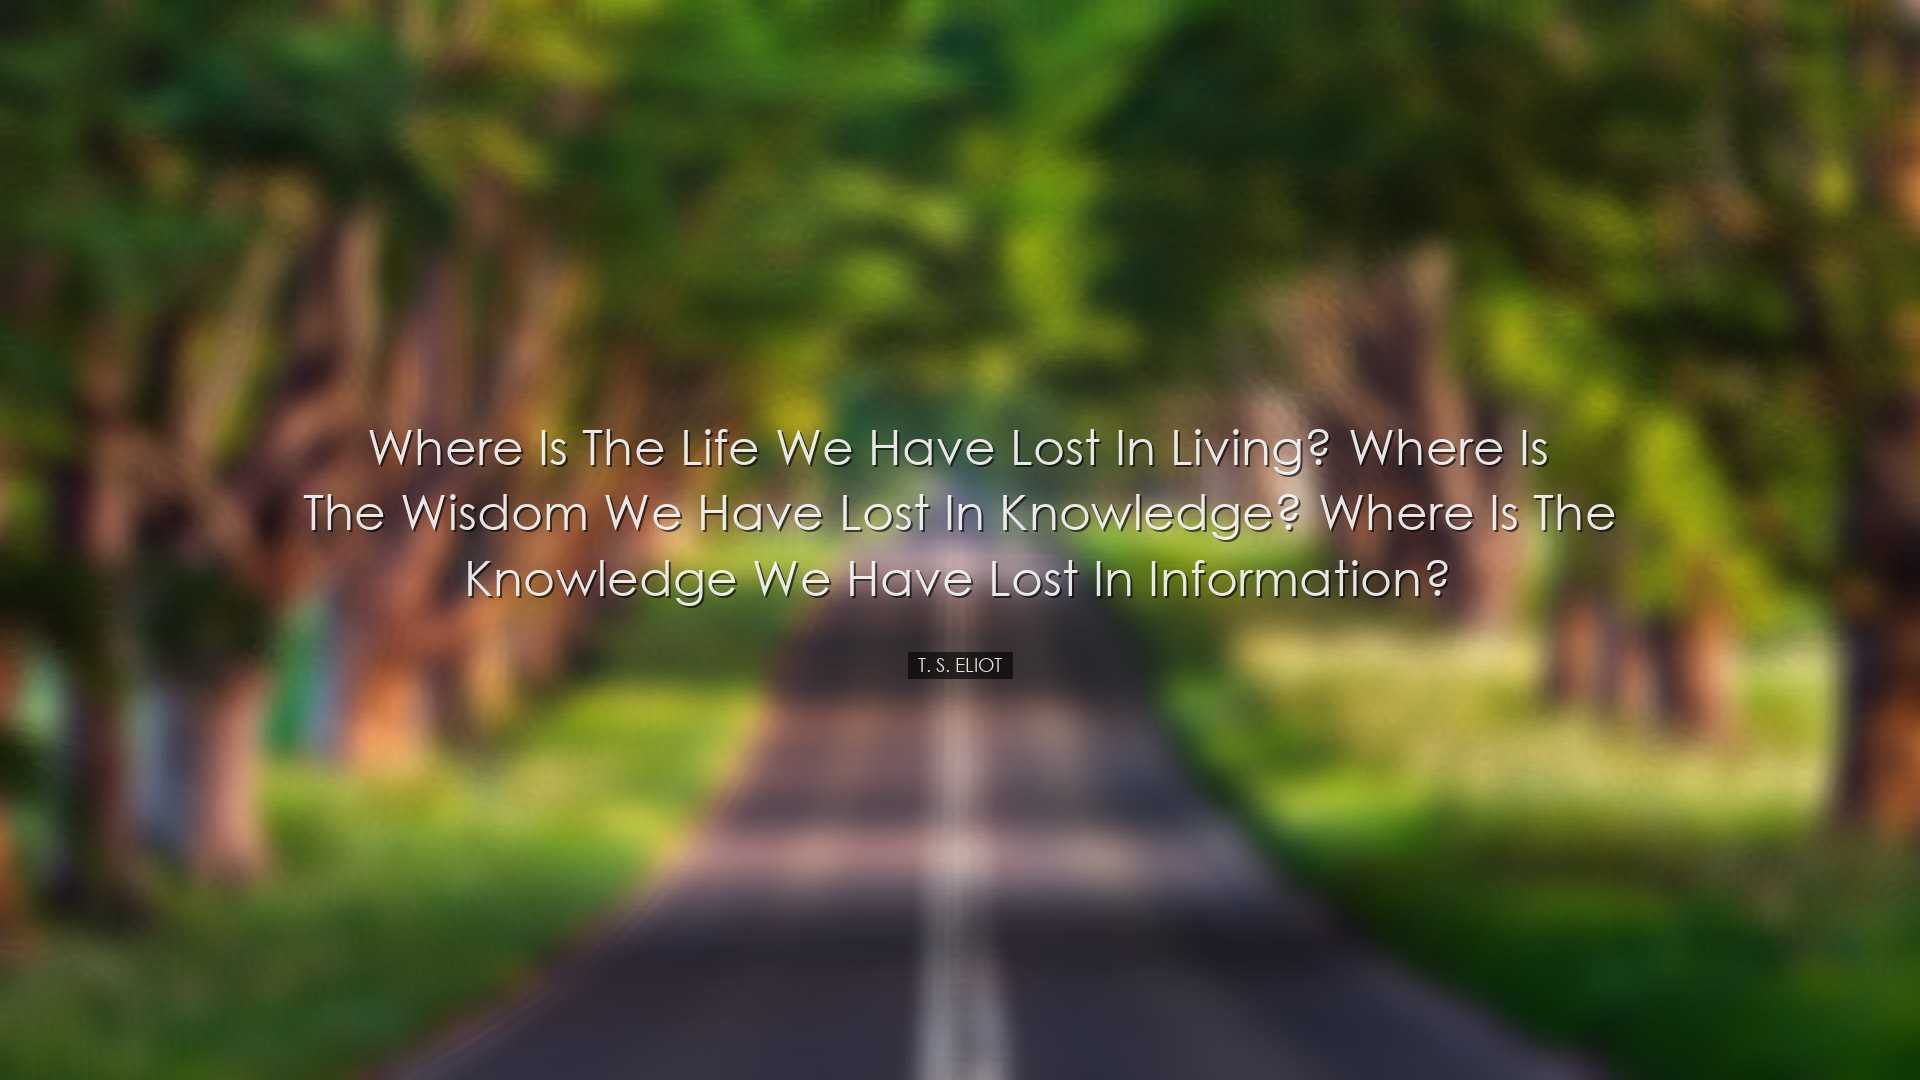 Where is the Life we have lost in living? Where is the wisdom we h